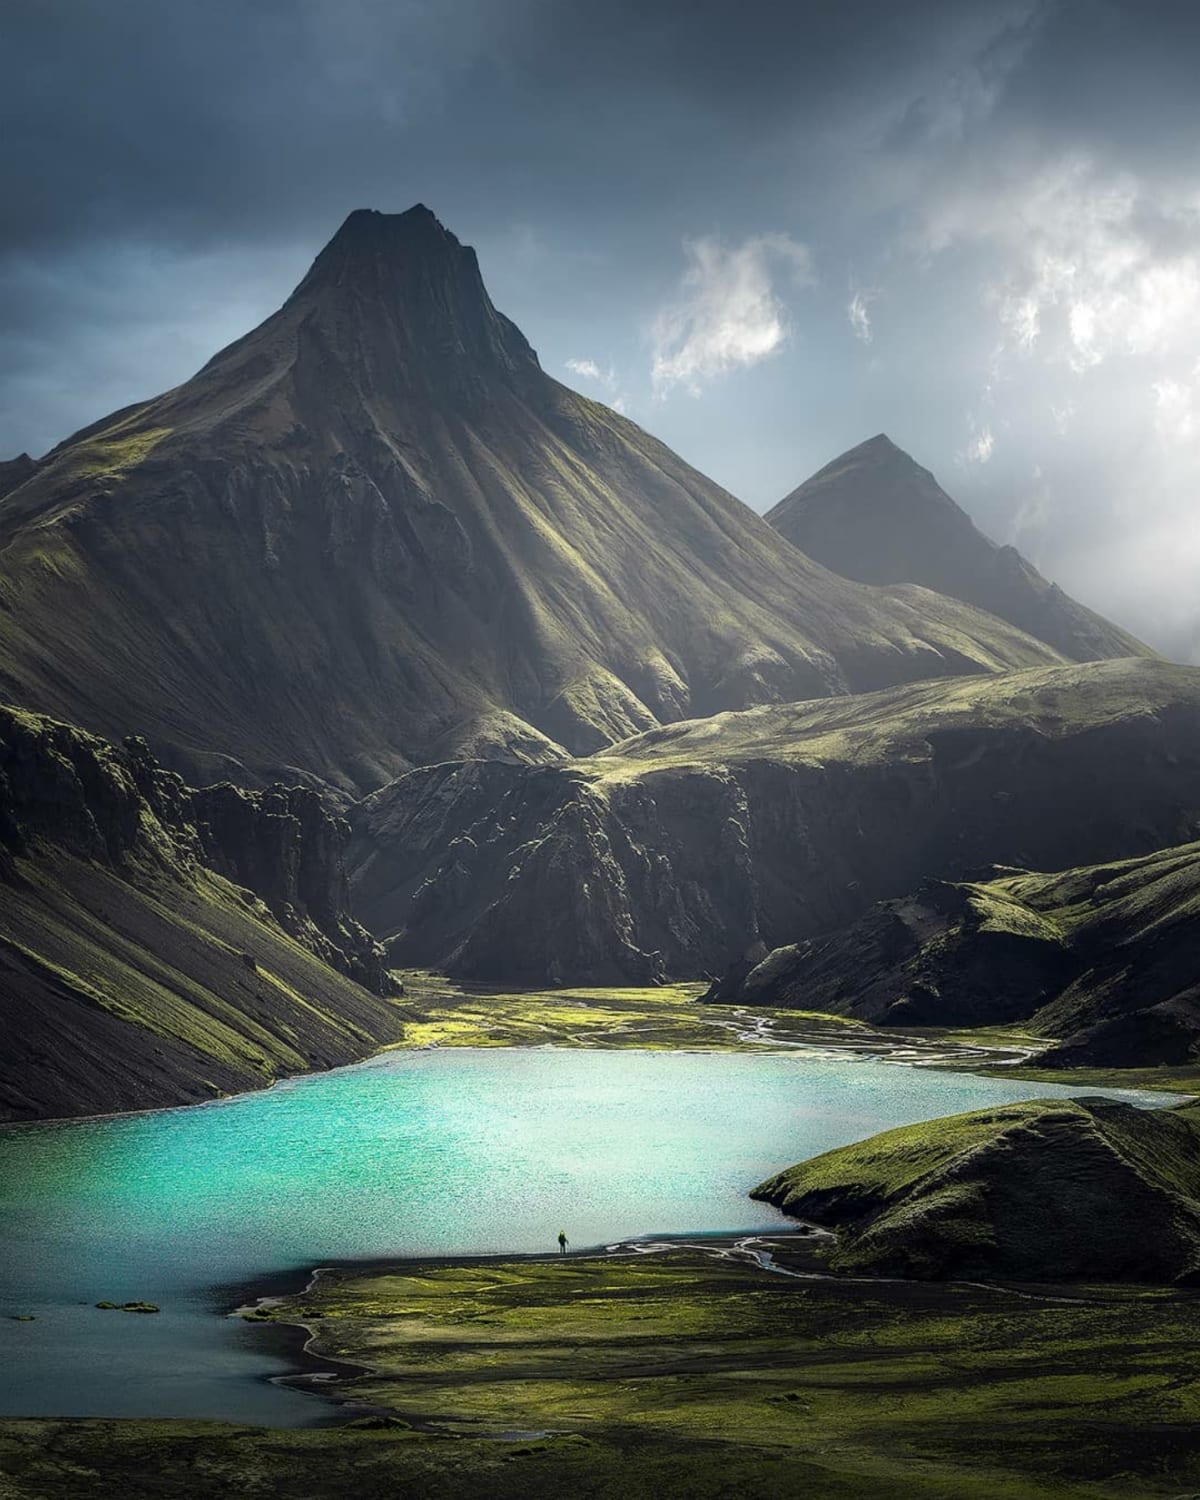 The magnificence of Iceland